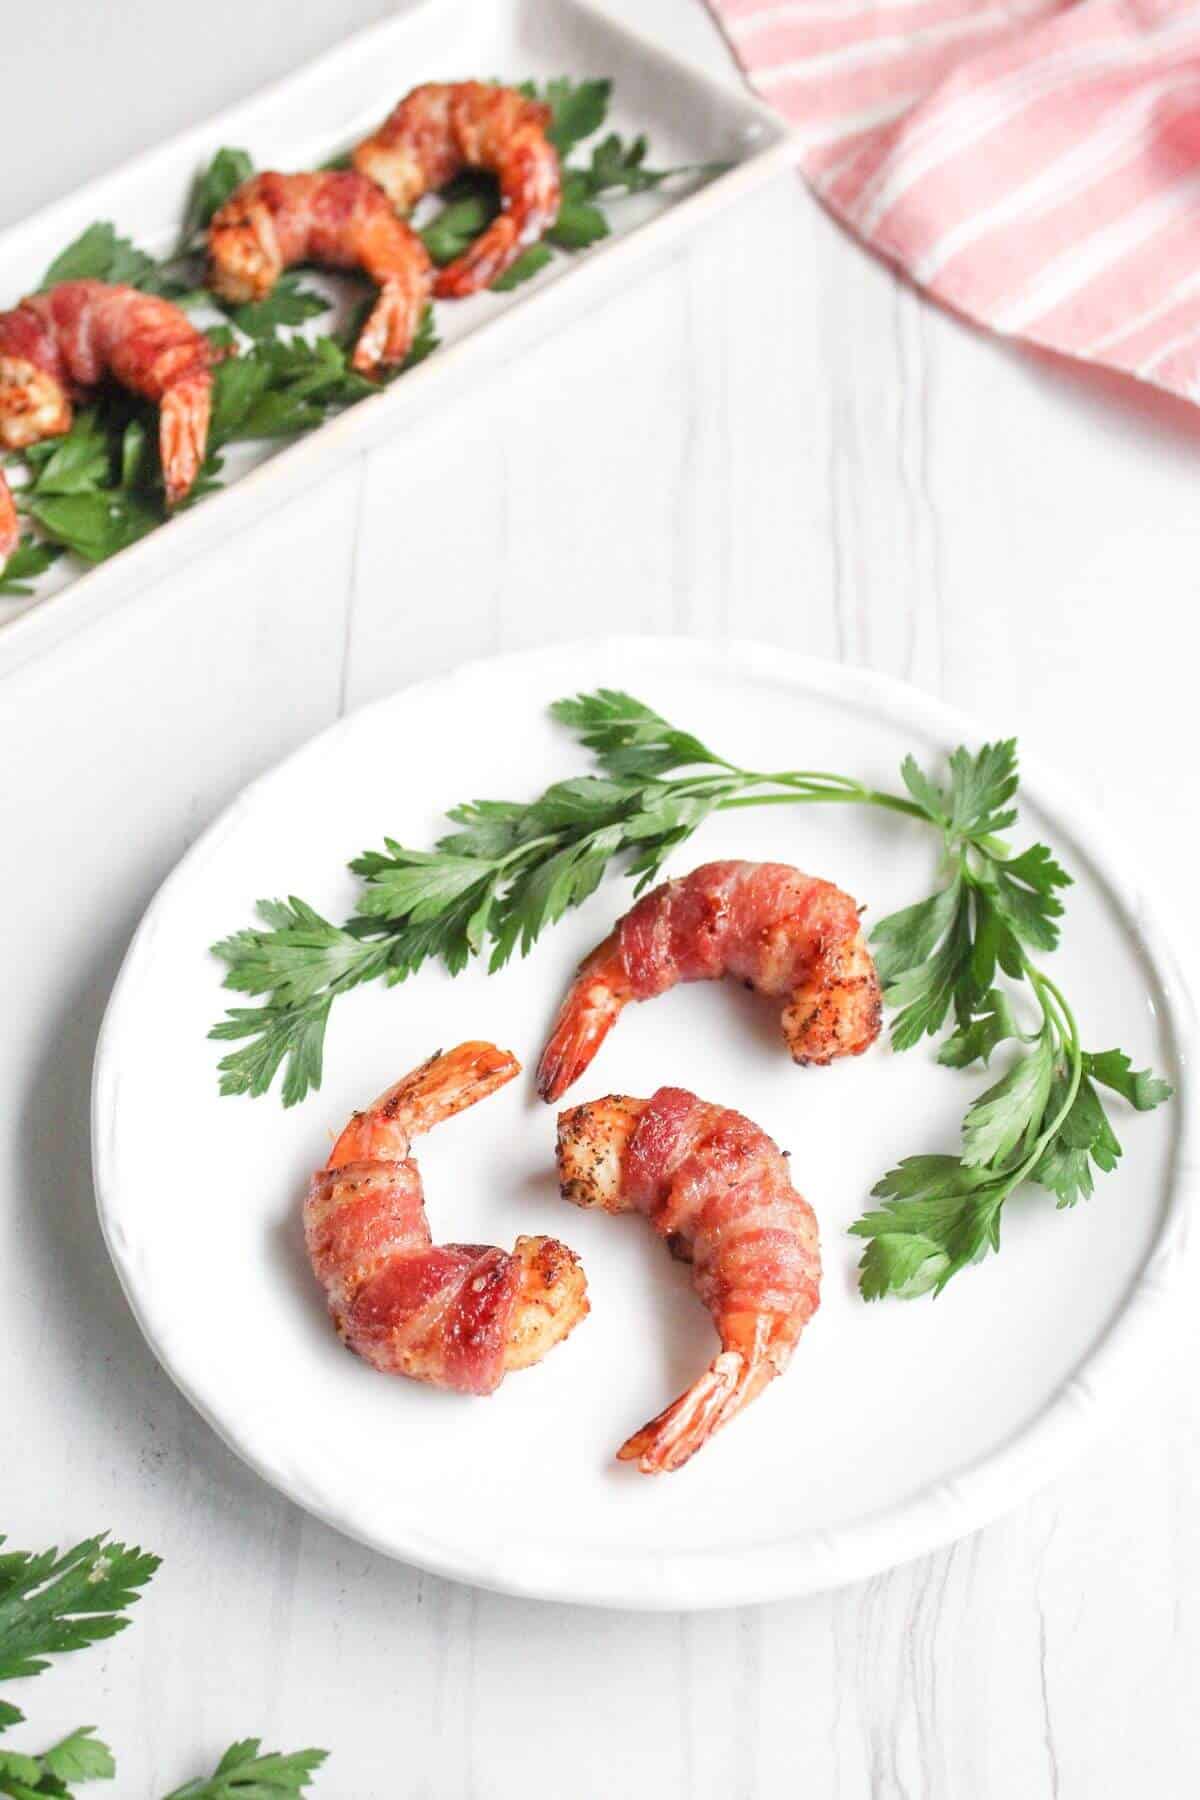 Bacon wrapped shrimp on a plate with parsley.